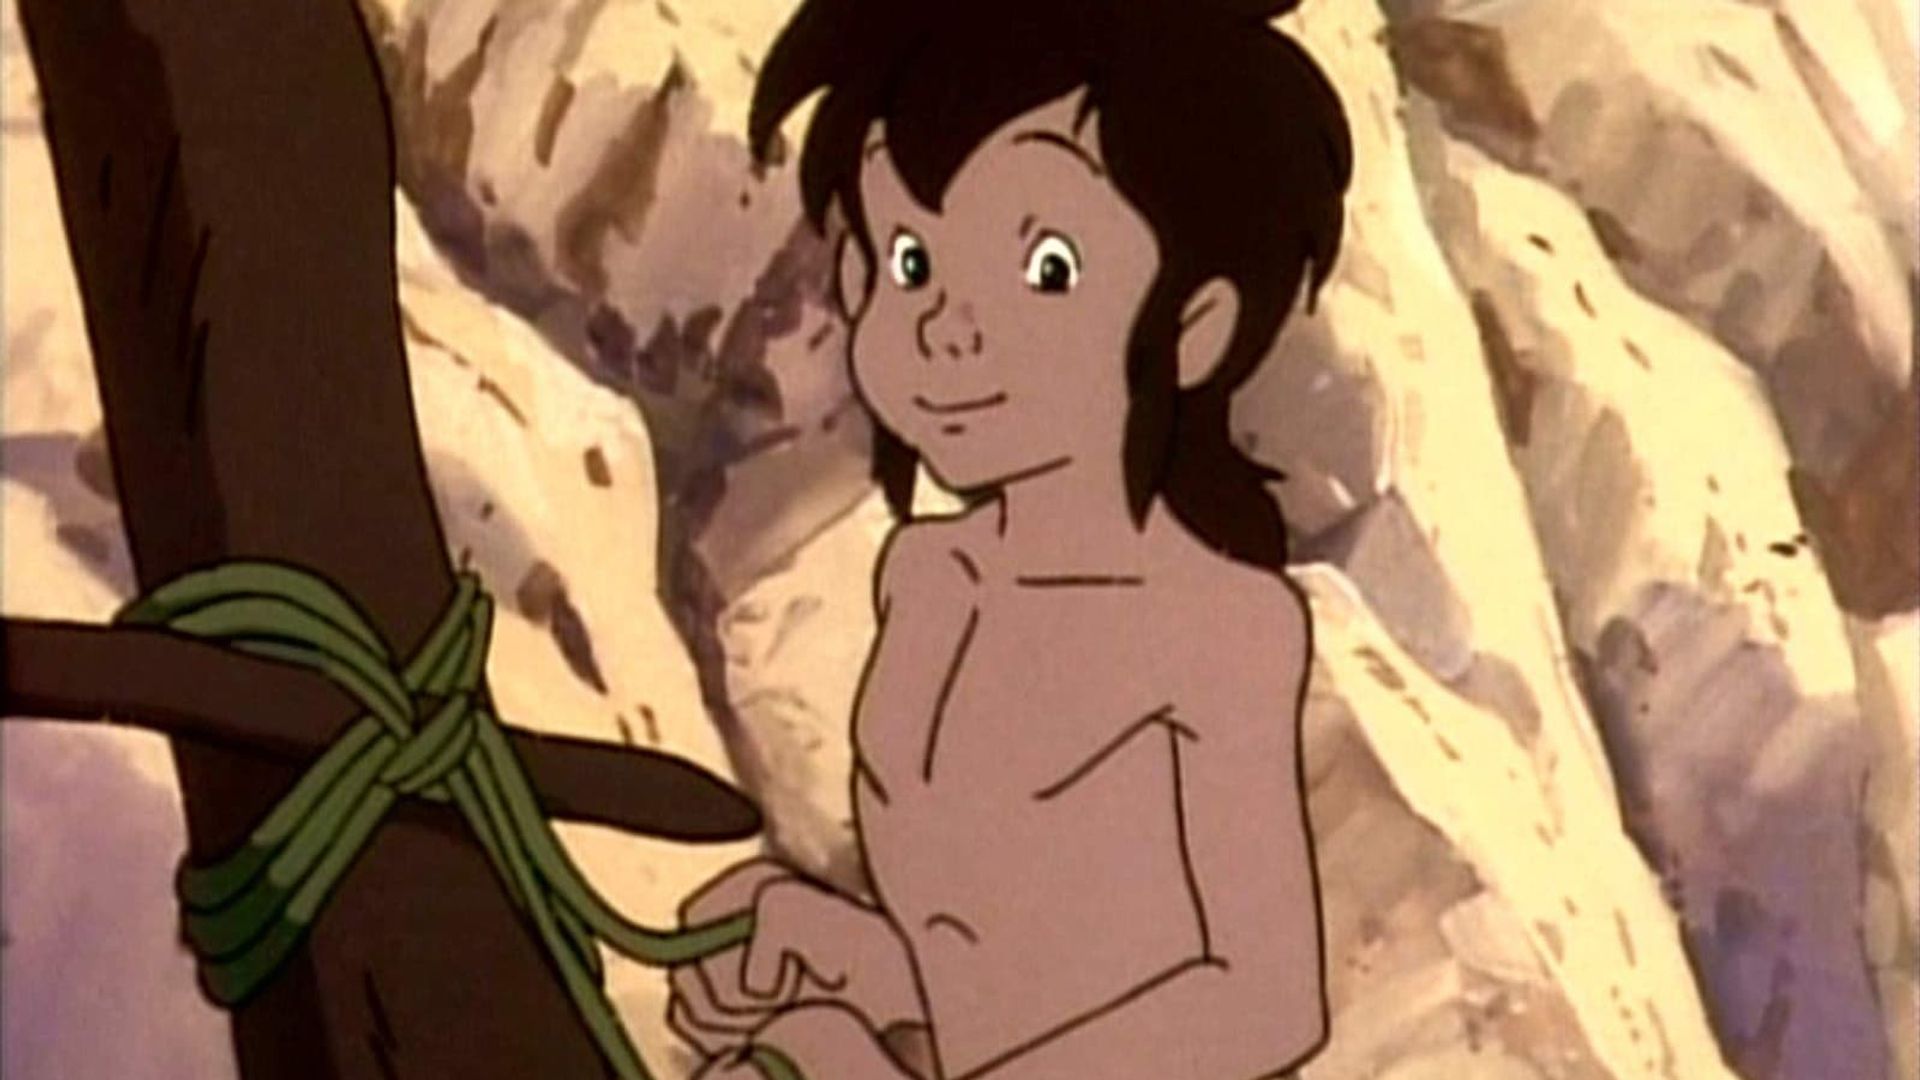 The Jungle Book: The Adventures of Mowgli background